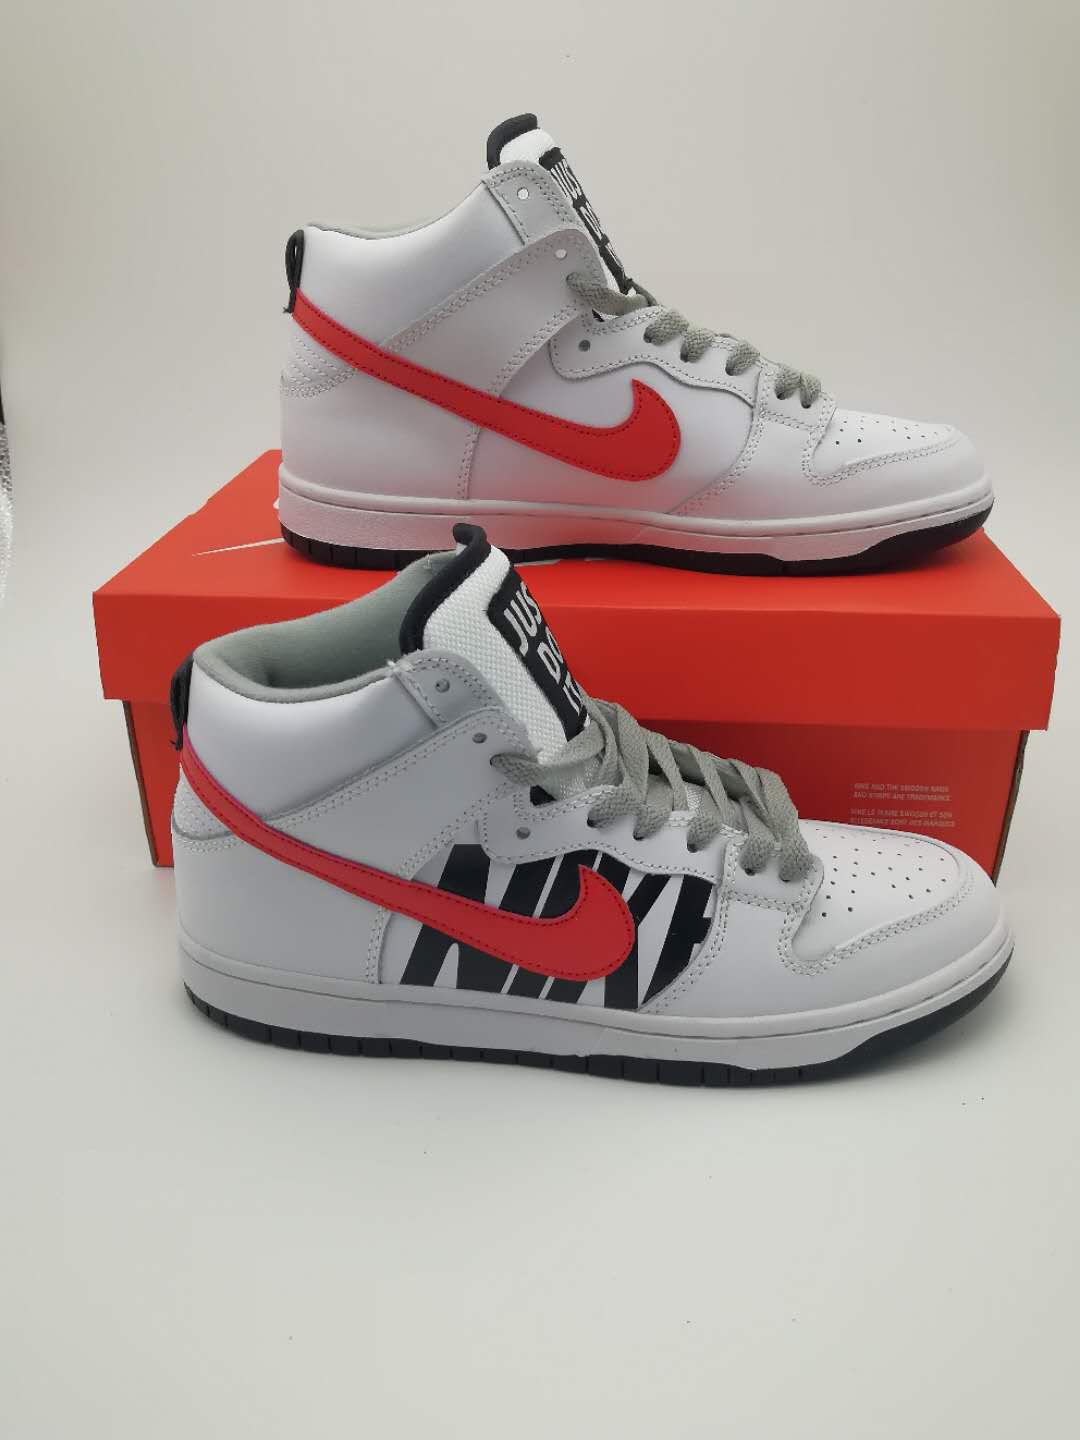 Women UNDFTD x Nike Dunk Lux White Black Red Shoes